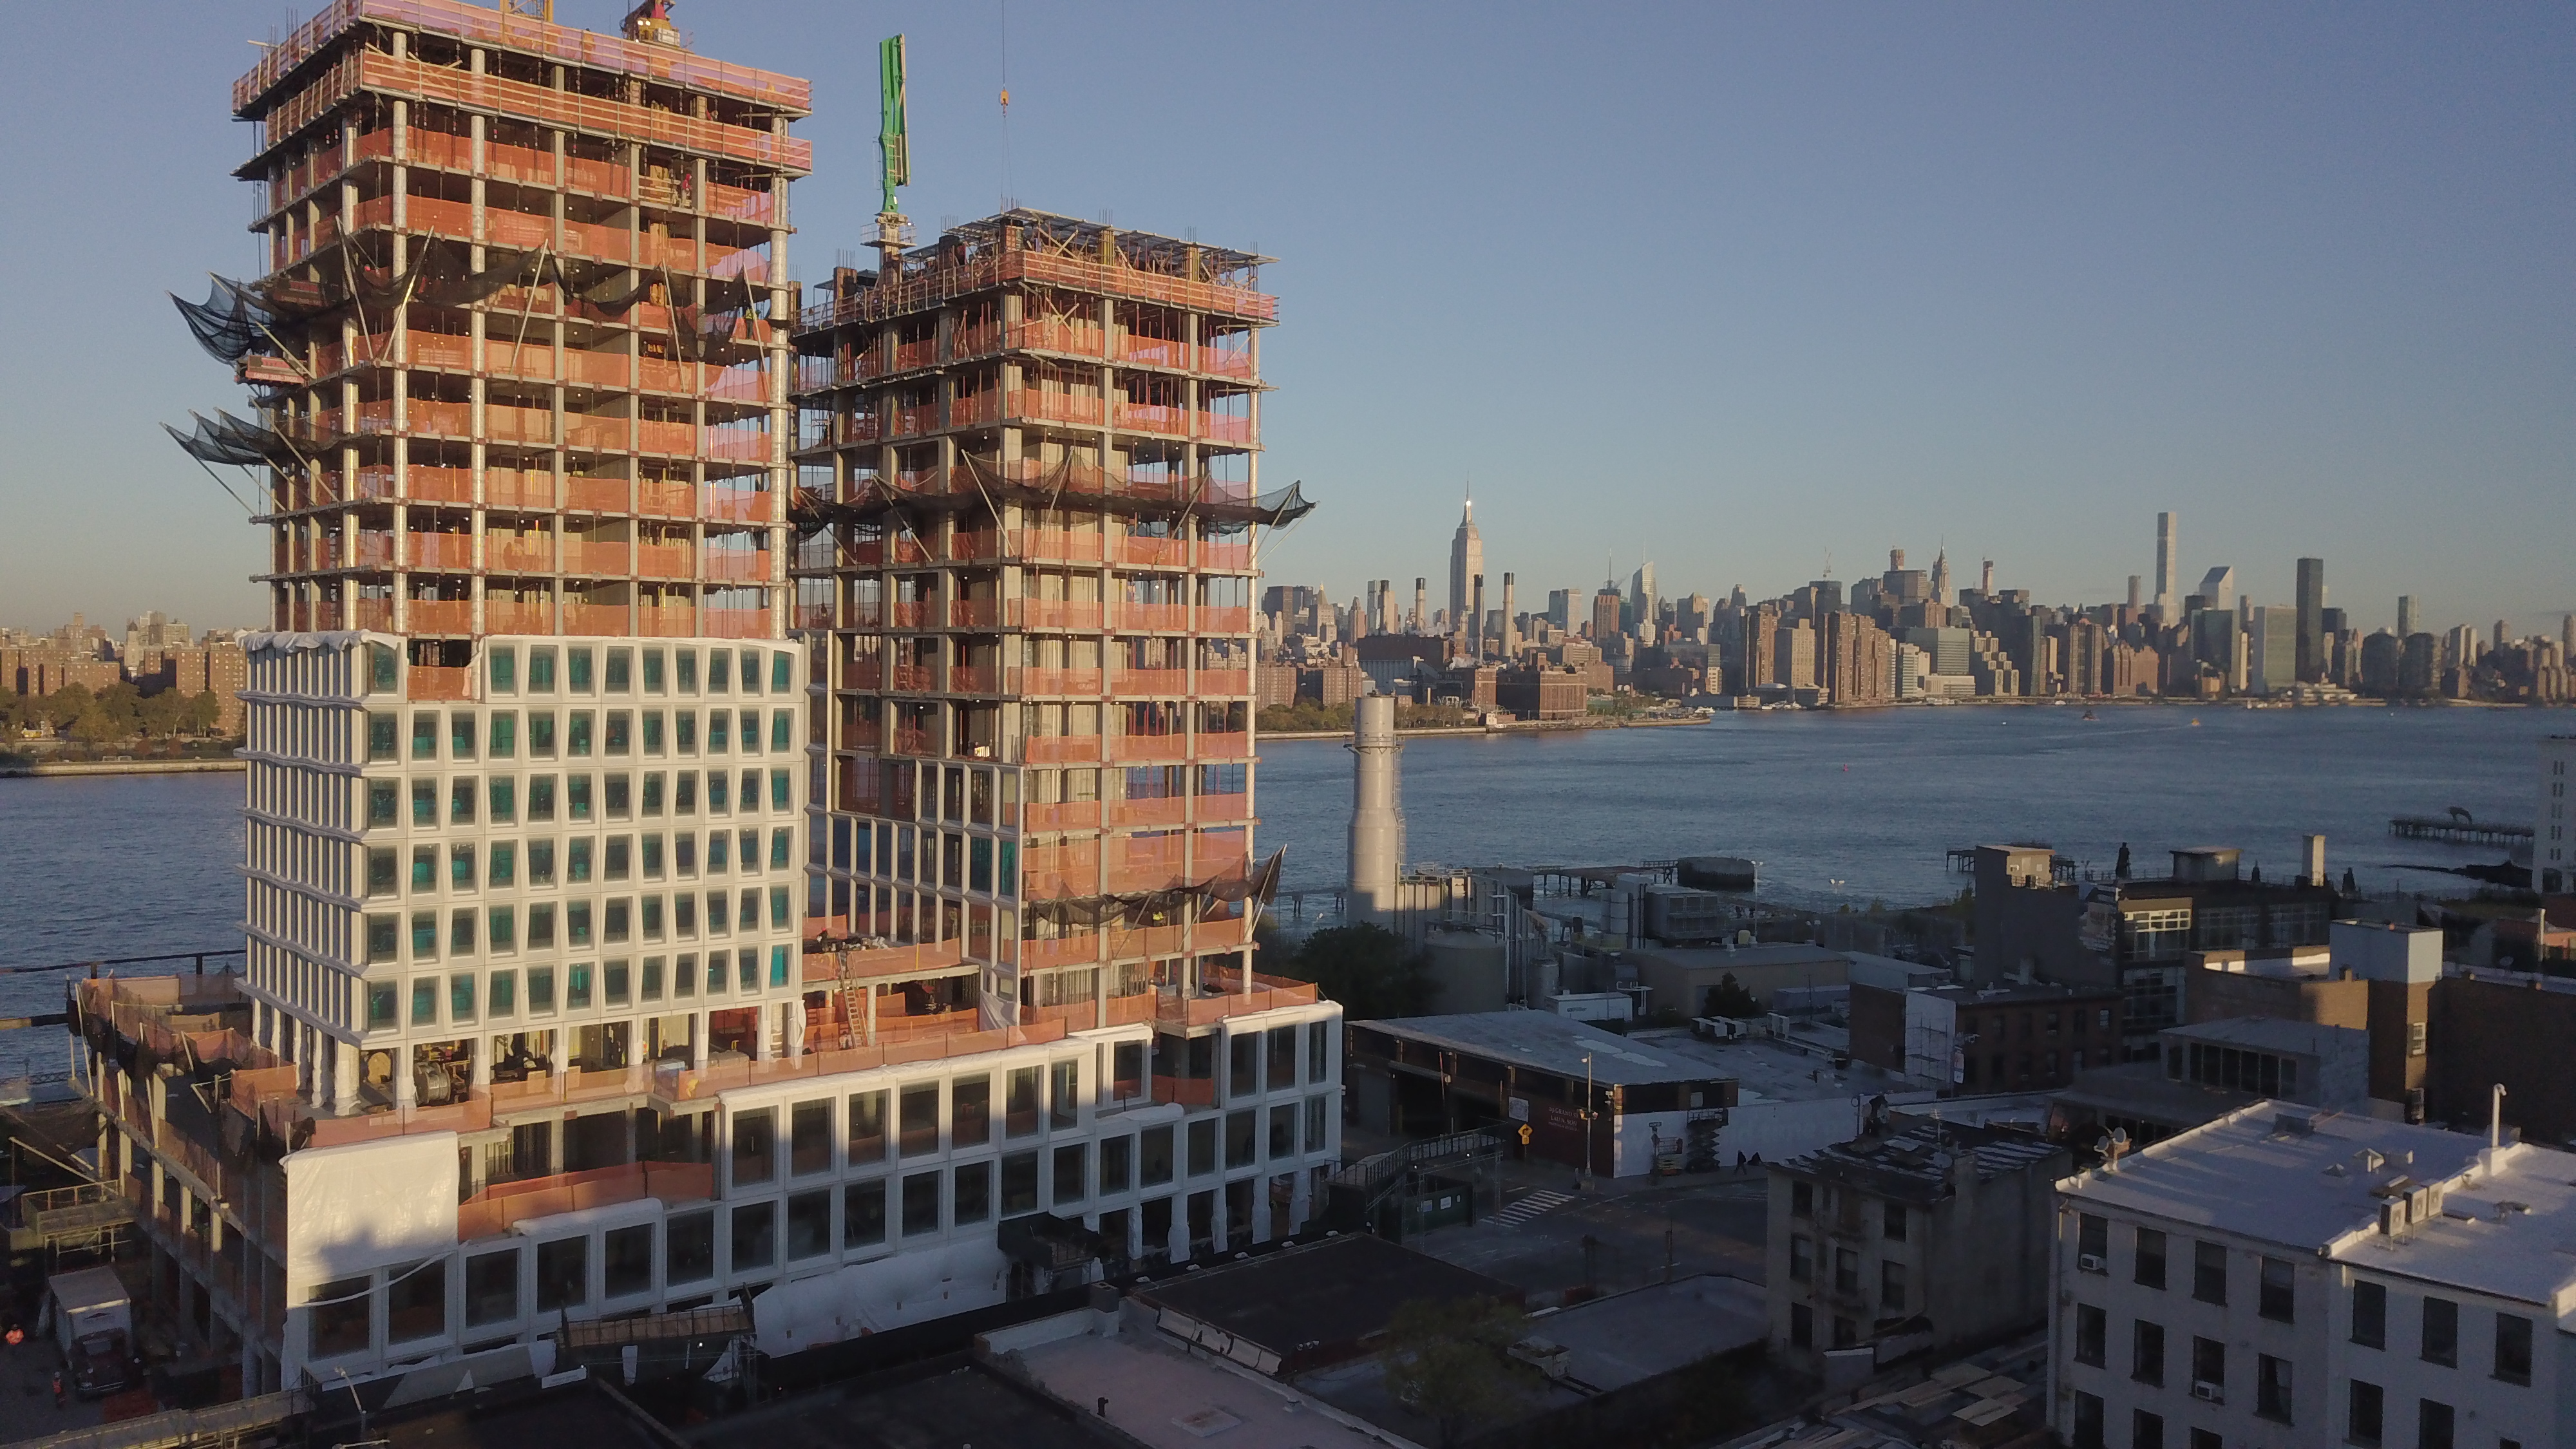 Birds eye view of the Domino Sugar building under construction, bottom half of the building has concrete facade and upper portion is open with scaffolding.